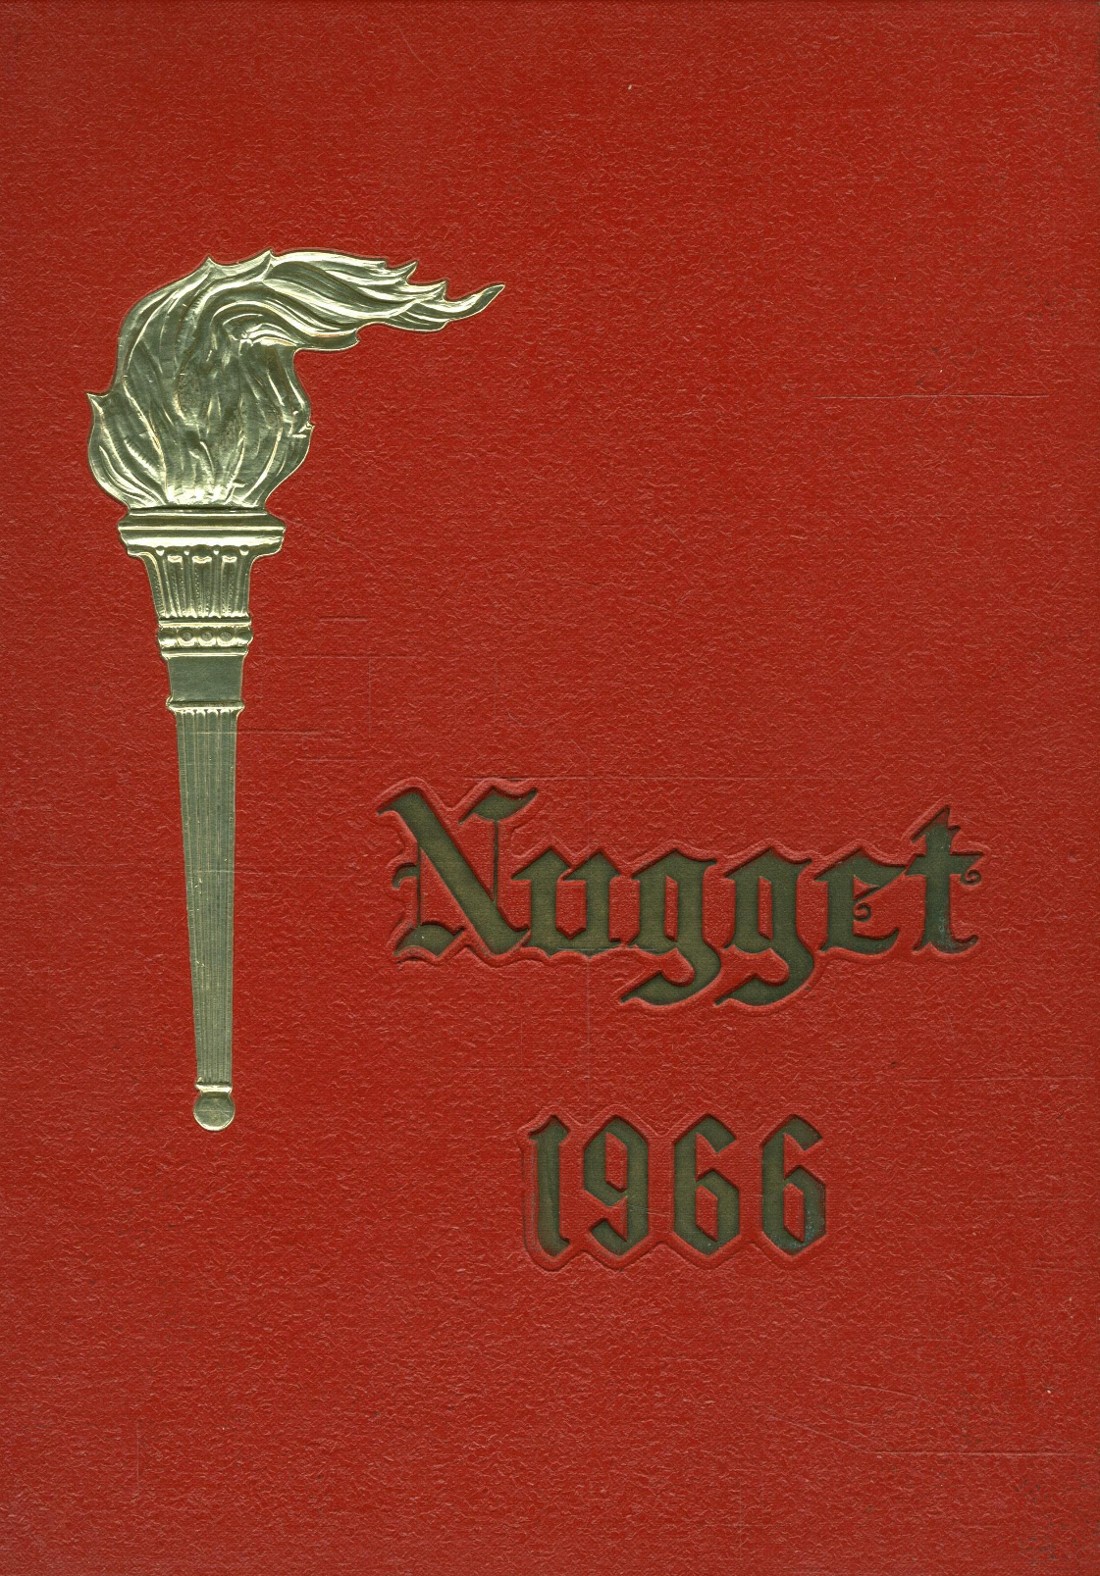 1966 yearbook from Butler High School from Butler, New Jersey